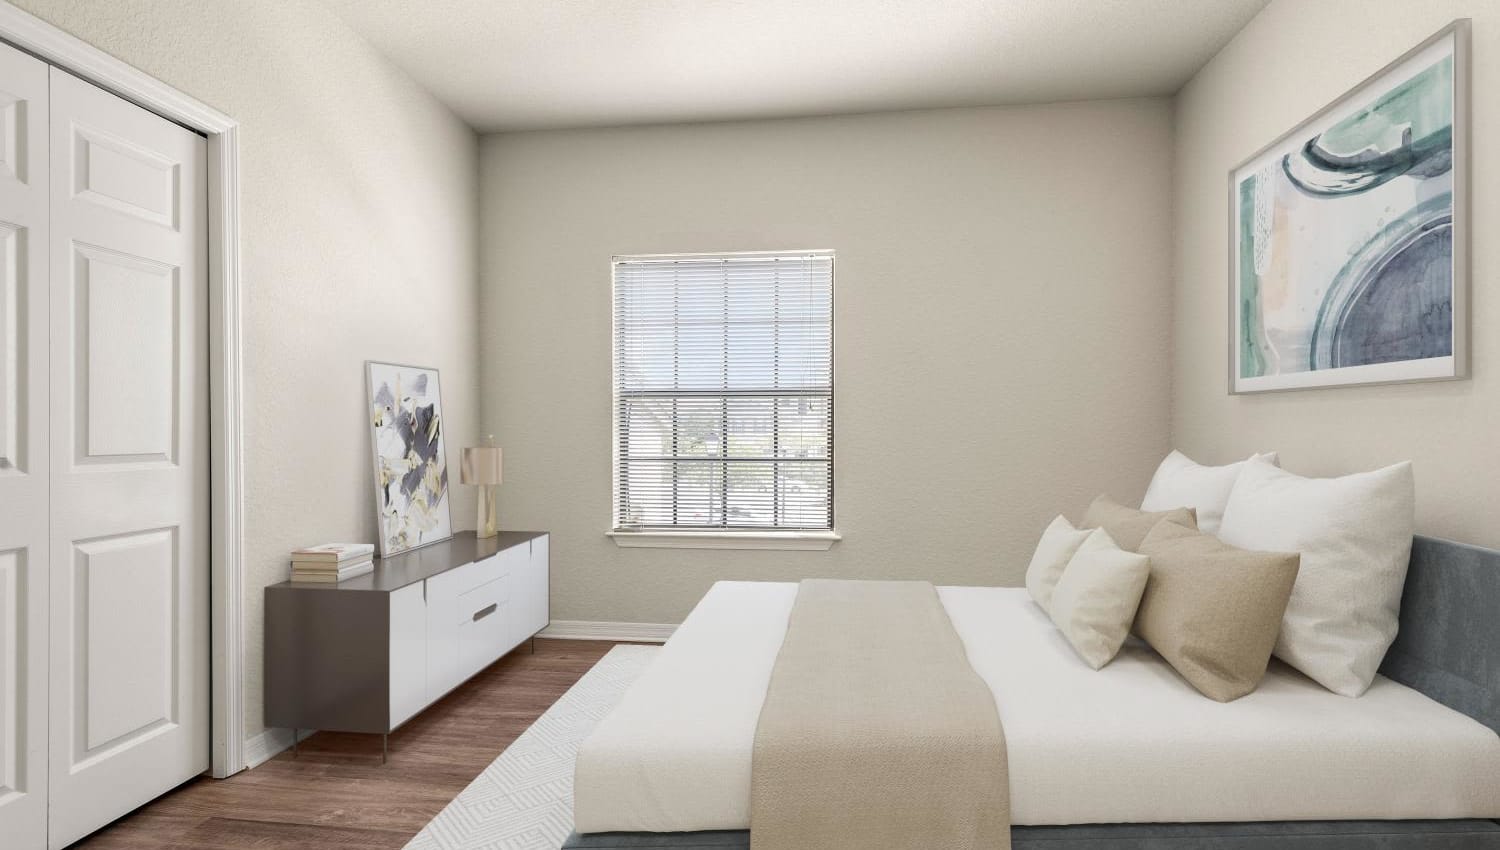 Bedroom with wooden flooring at Mirador & Stovall at River City in Jacksonville, Florida